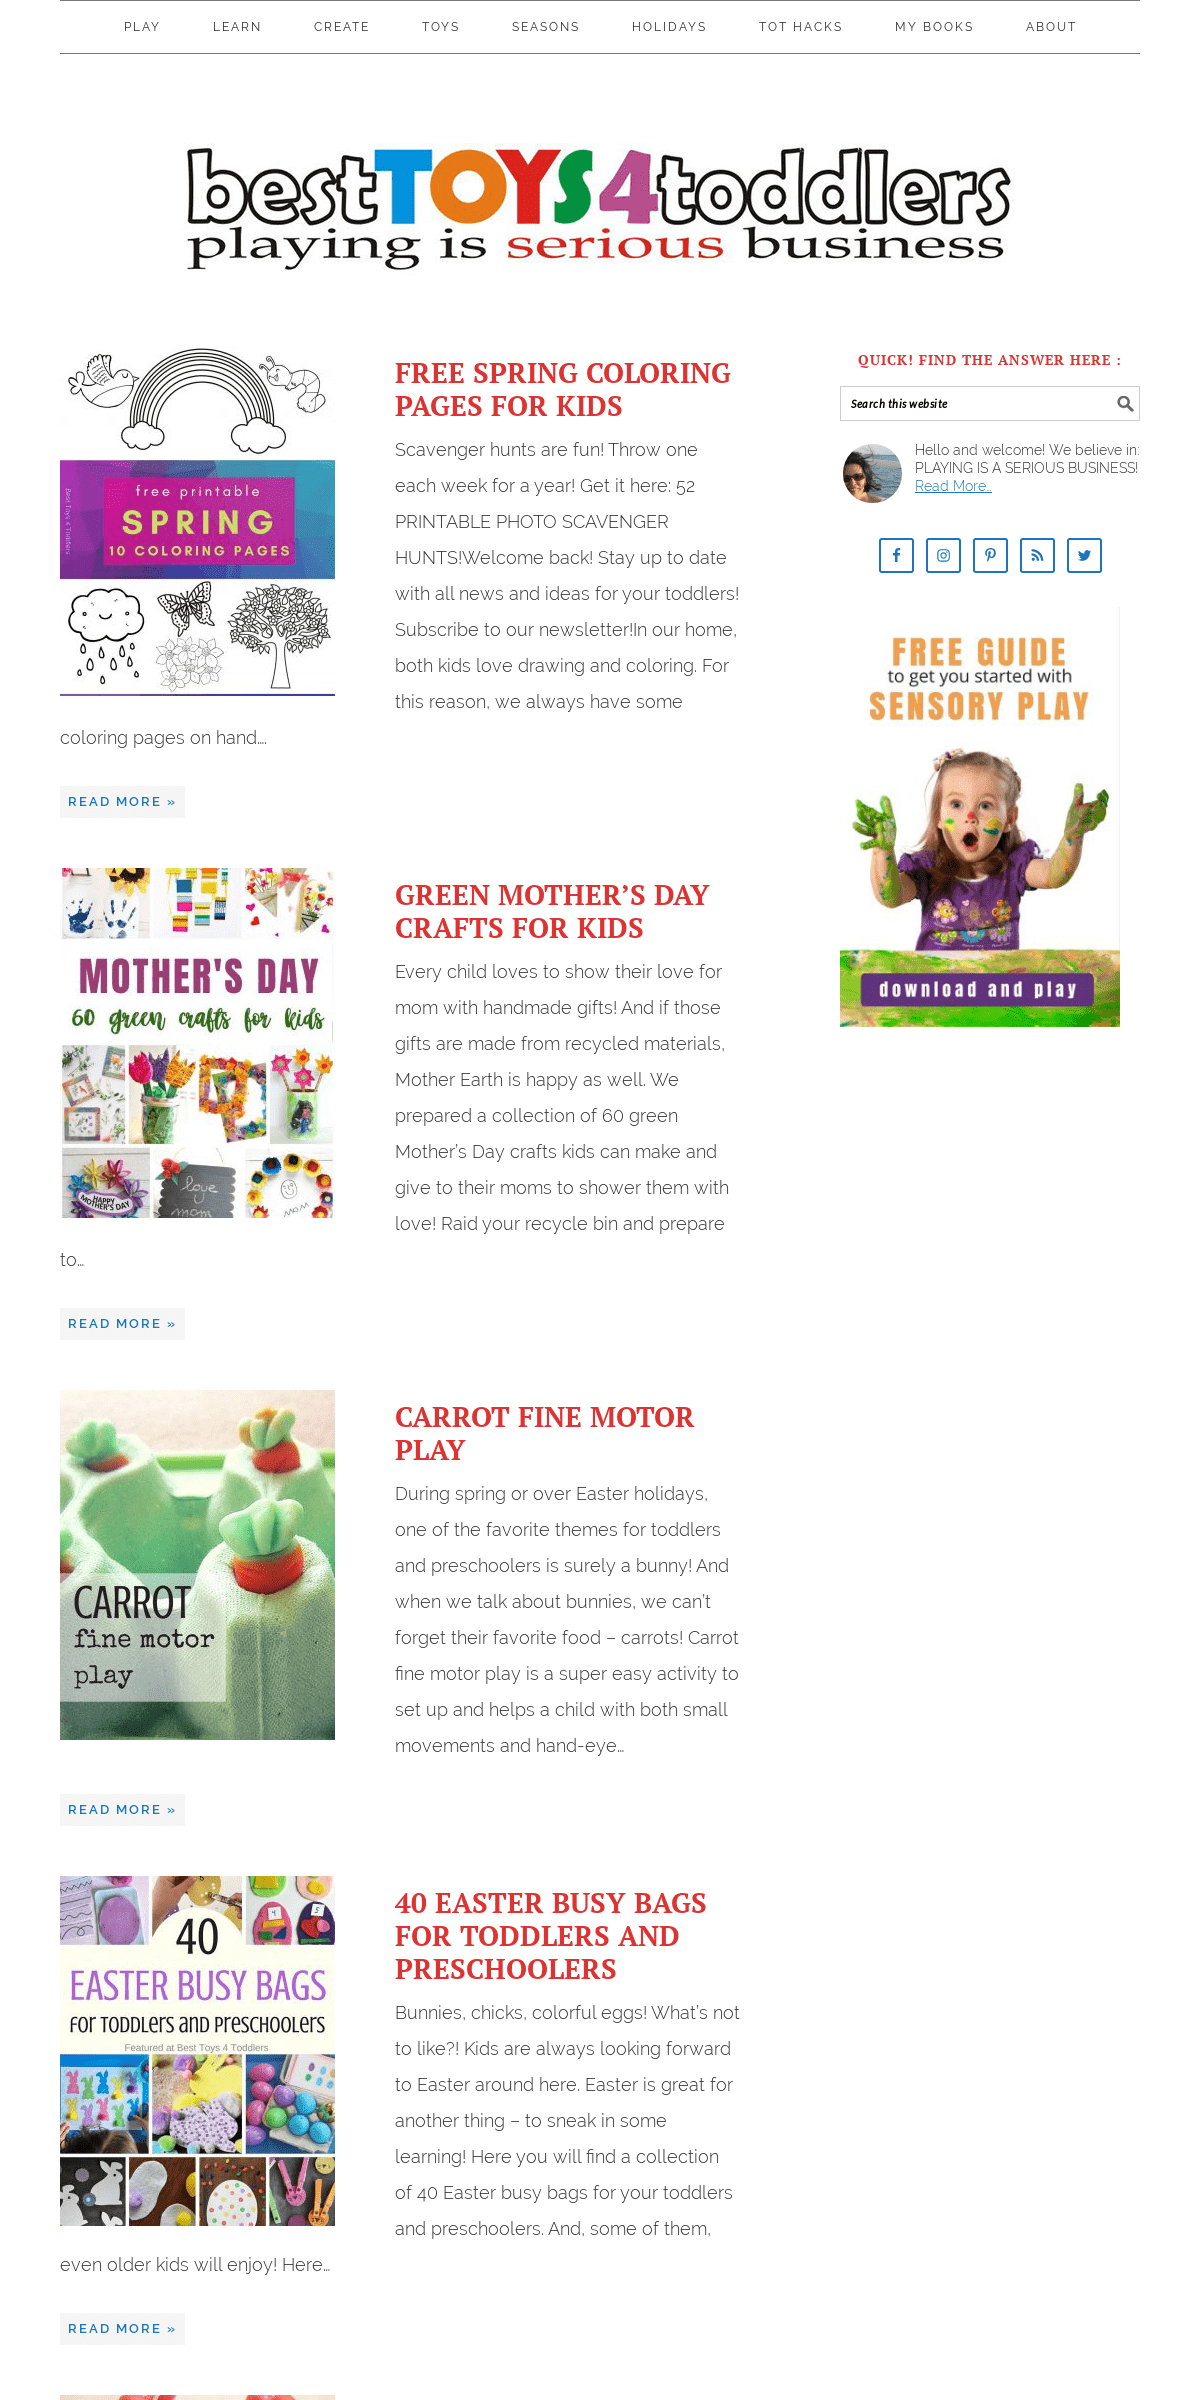 A complete backup of besttoys4toddlers.com